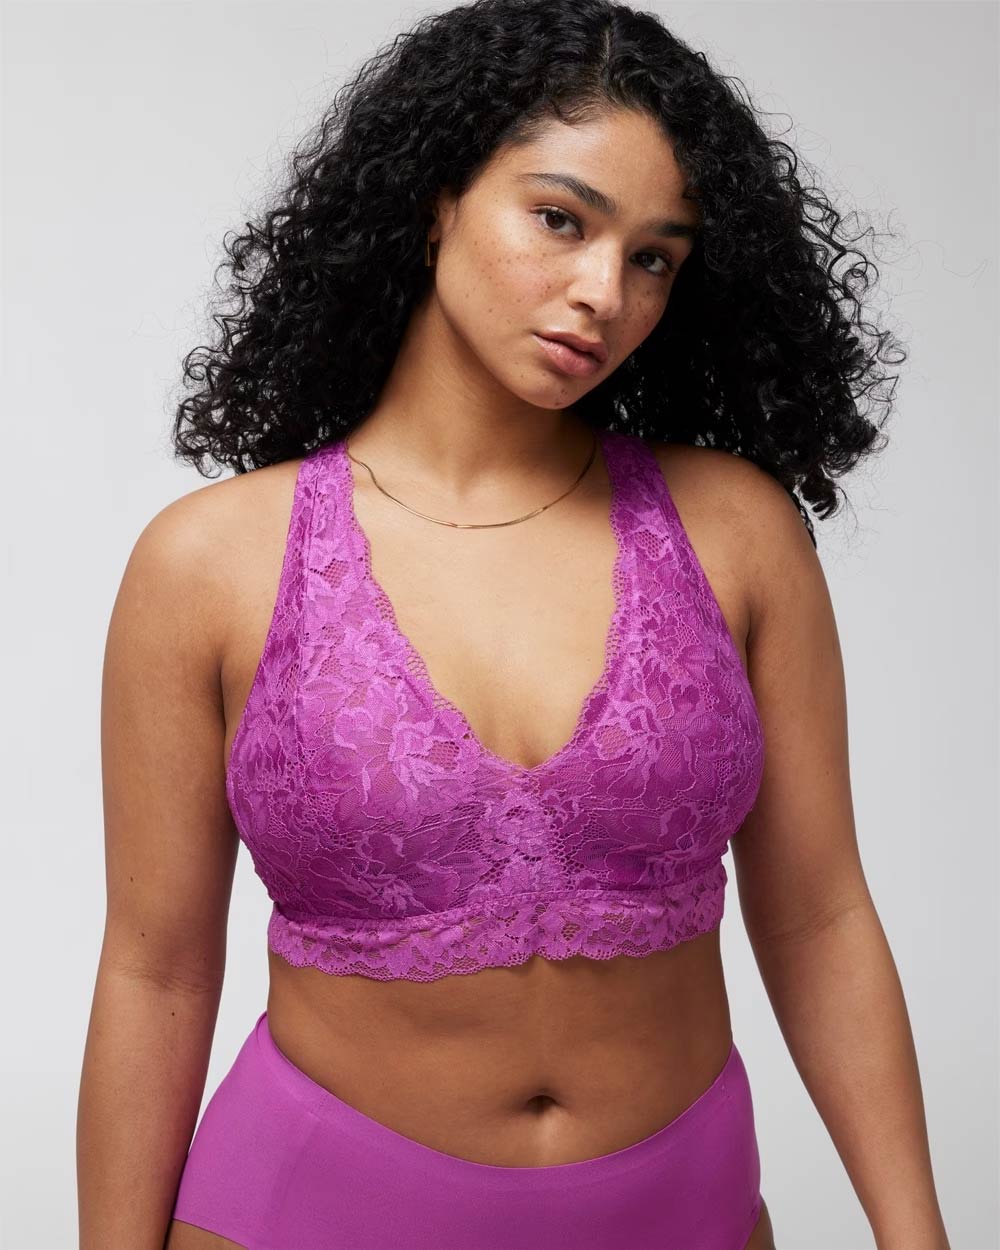 The SOMA Hookup Blog - 7 Bras Every Woman Needs This Summer